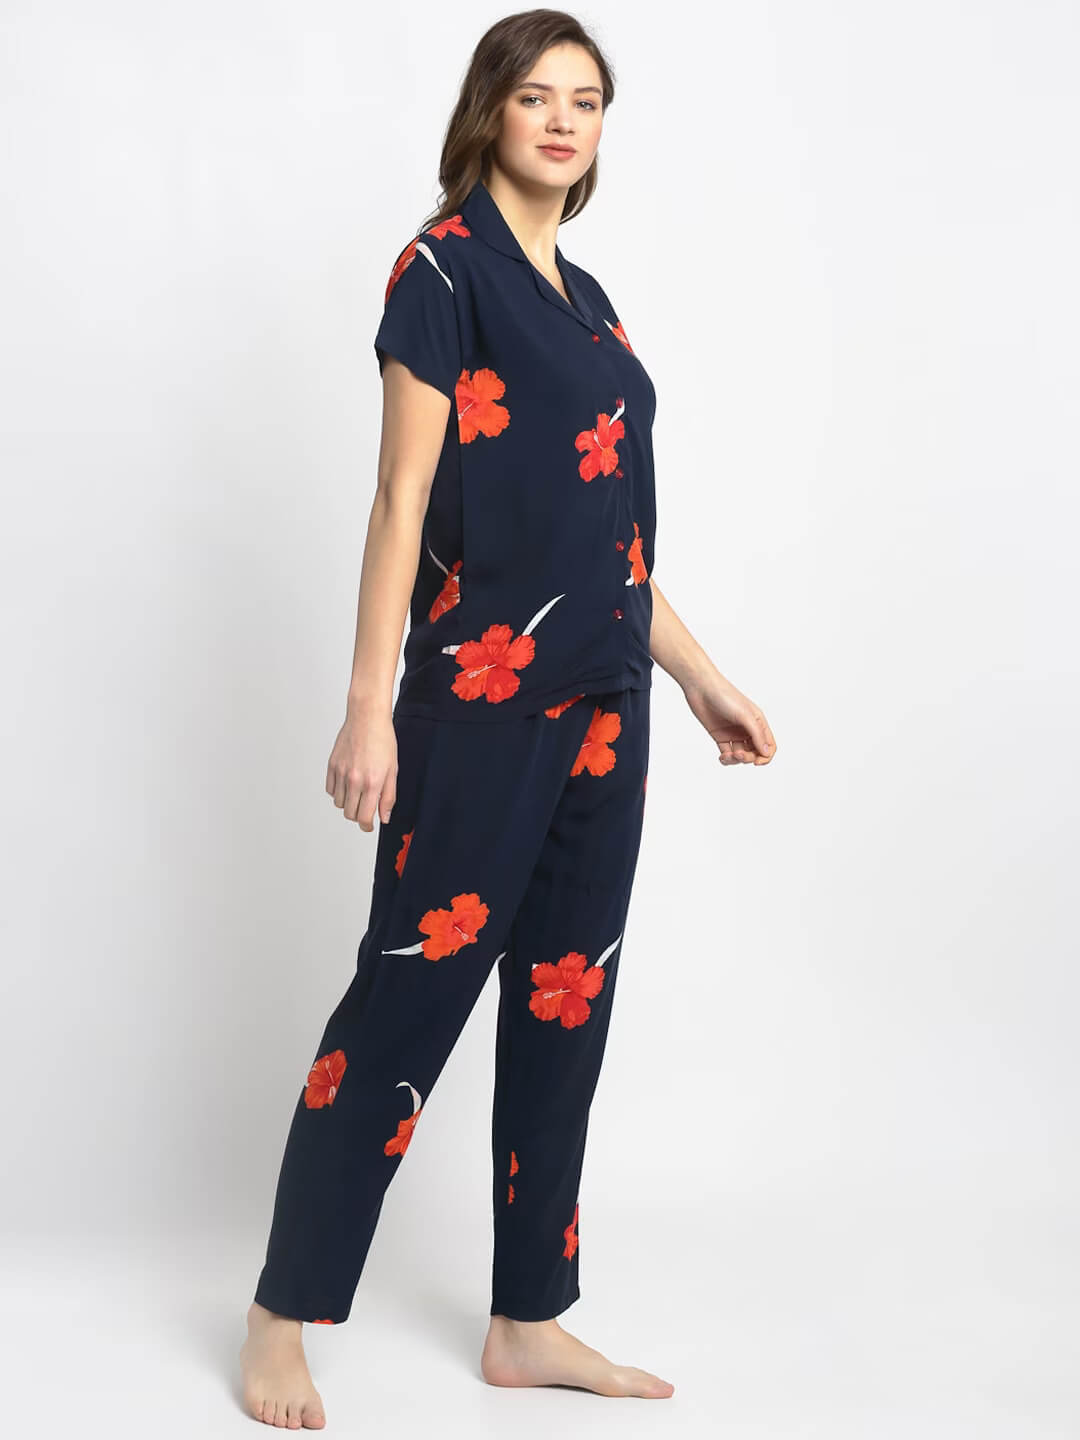 Navy Color Floral Printed Cotton Nightsuit For Women Claura Designs Pvt. Ltd. Nightsuit Floral, Navy Blue, Nightsuit, Rayon, Sleepwear